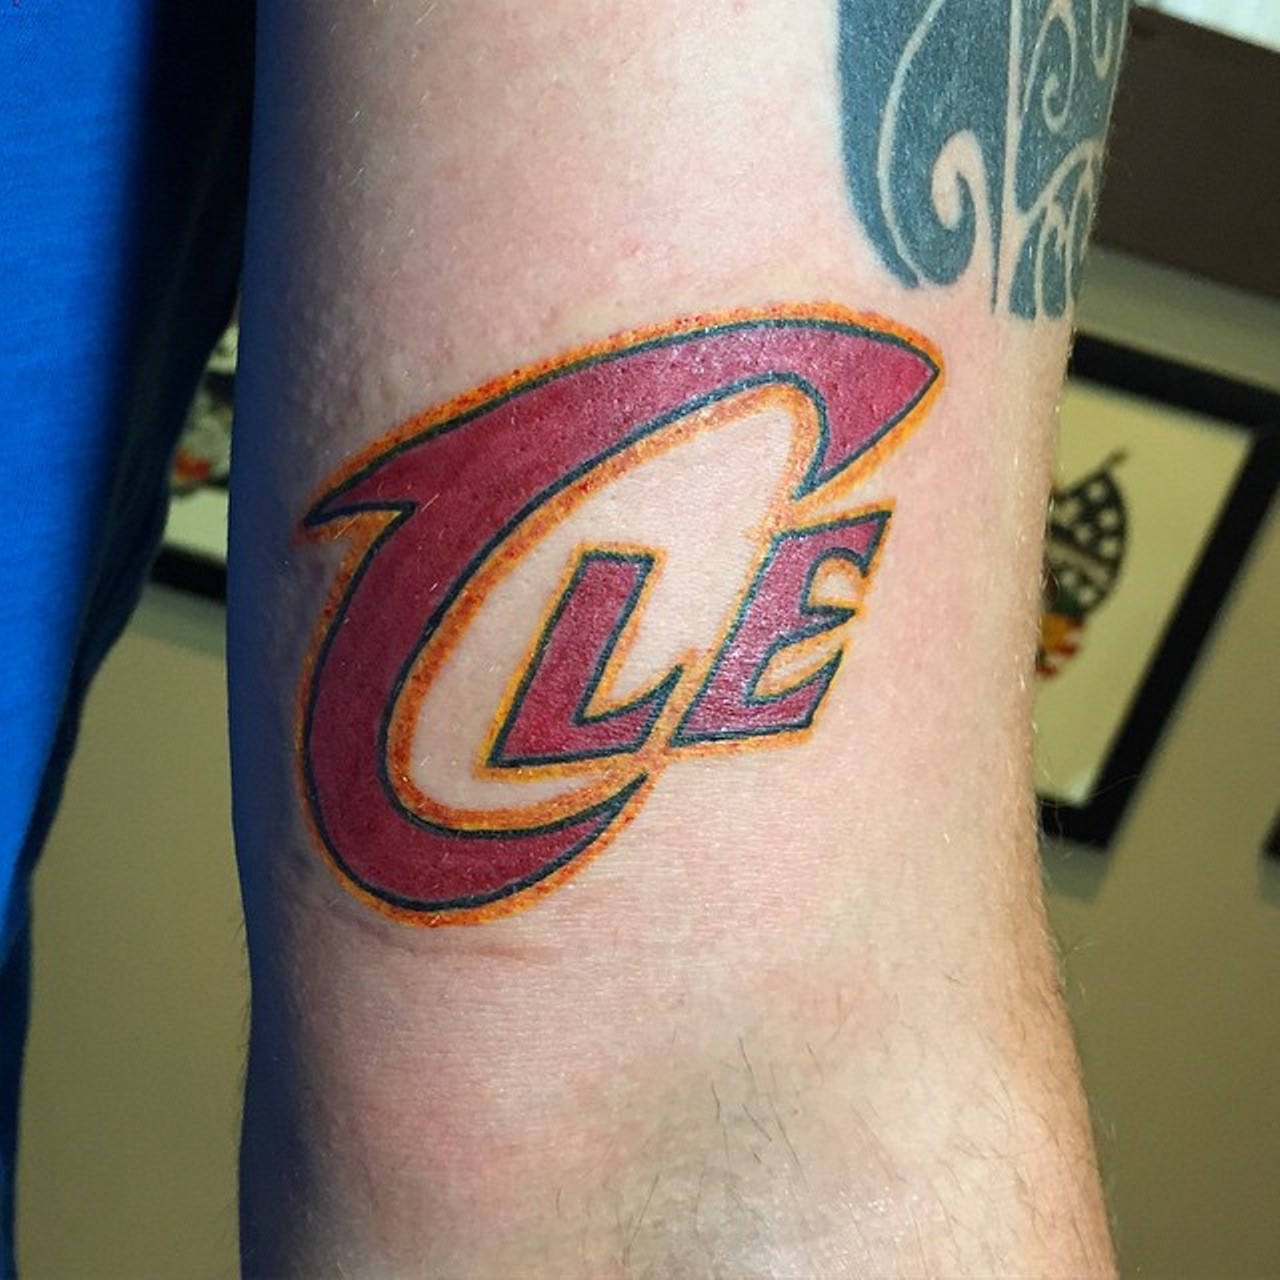 This Cavalier&#146;s inspired &#147;CLE,&#148; shows support to the Finals-bound team. Maybe he can add &#147;2015 NBA Champions&#148; after they win. Or before? (Photo courtesy of Instagram user @angushendry).